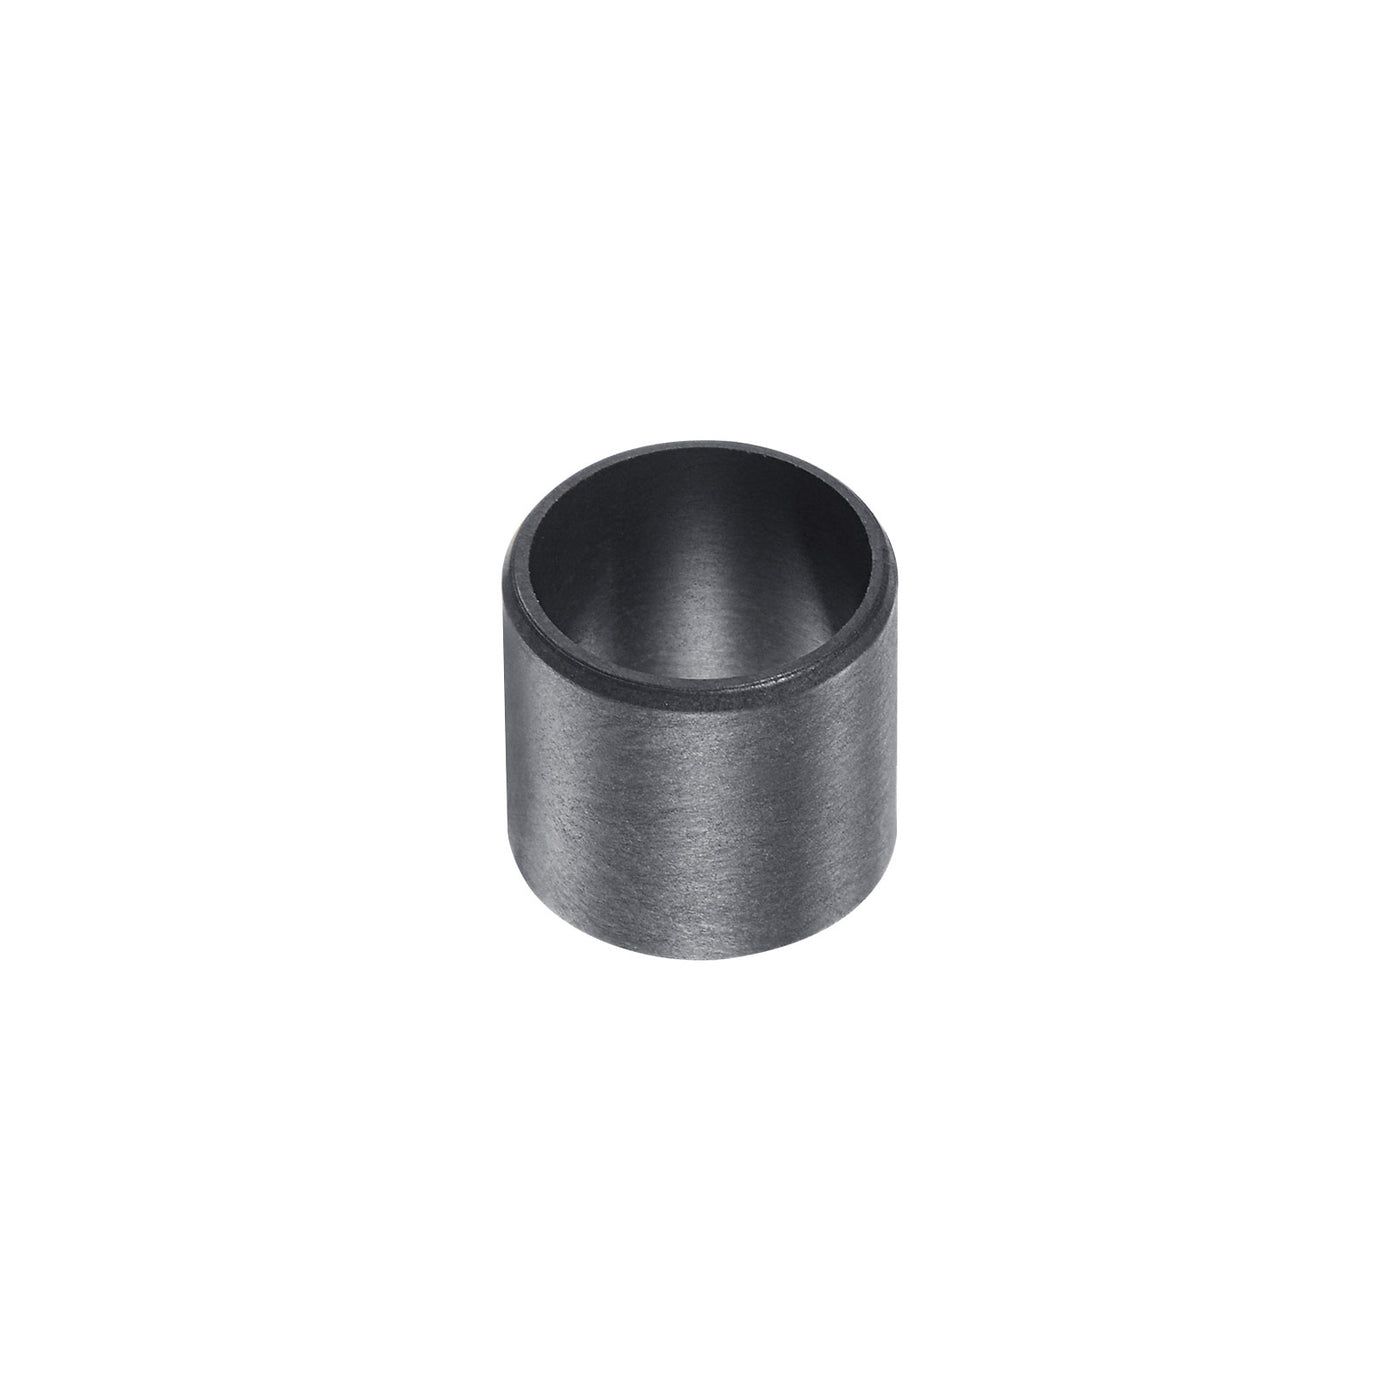 uxcell Uxcell Sleeve Bearings 12mmx14mmx10mm POM Wrapped Oilless Bushings Black